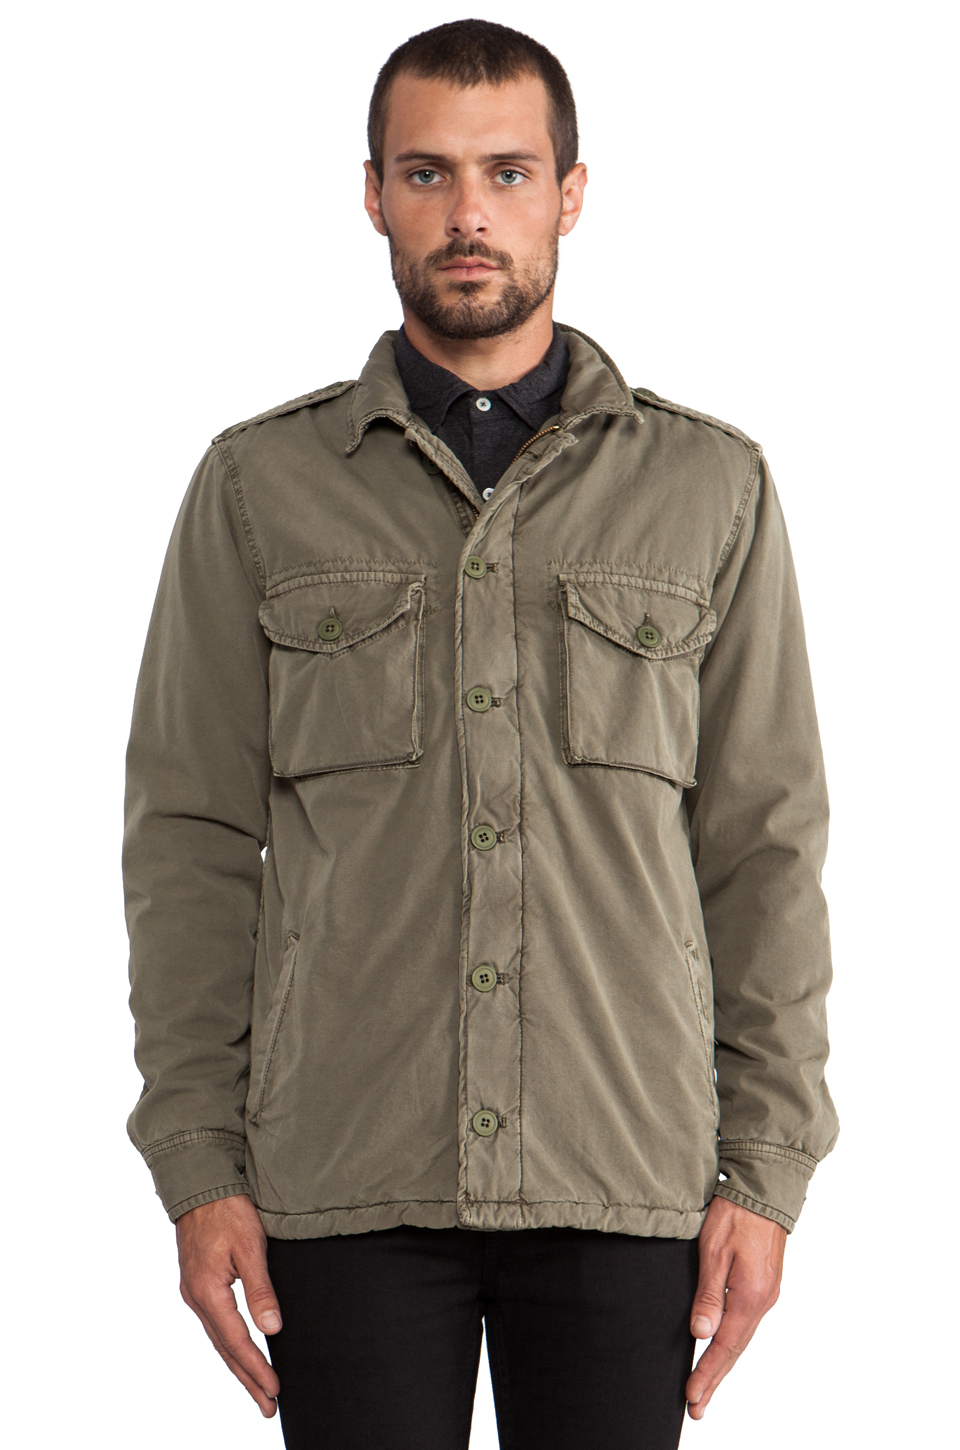 Hartford Army Jacket in Olive in Army Green (Green) for Men - Lyst